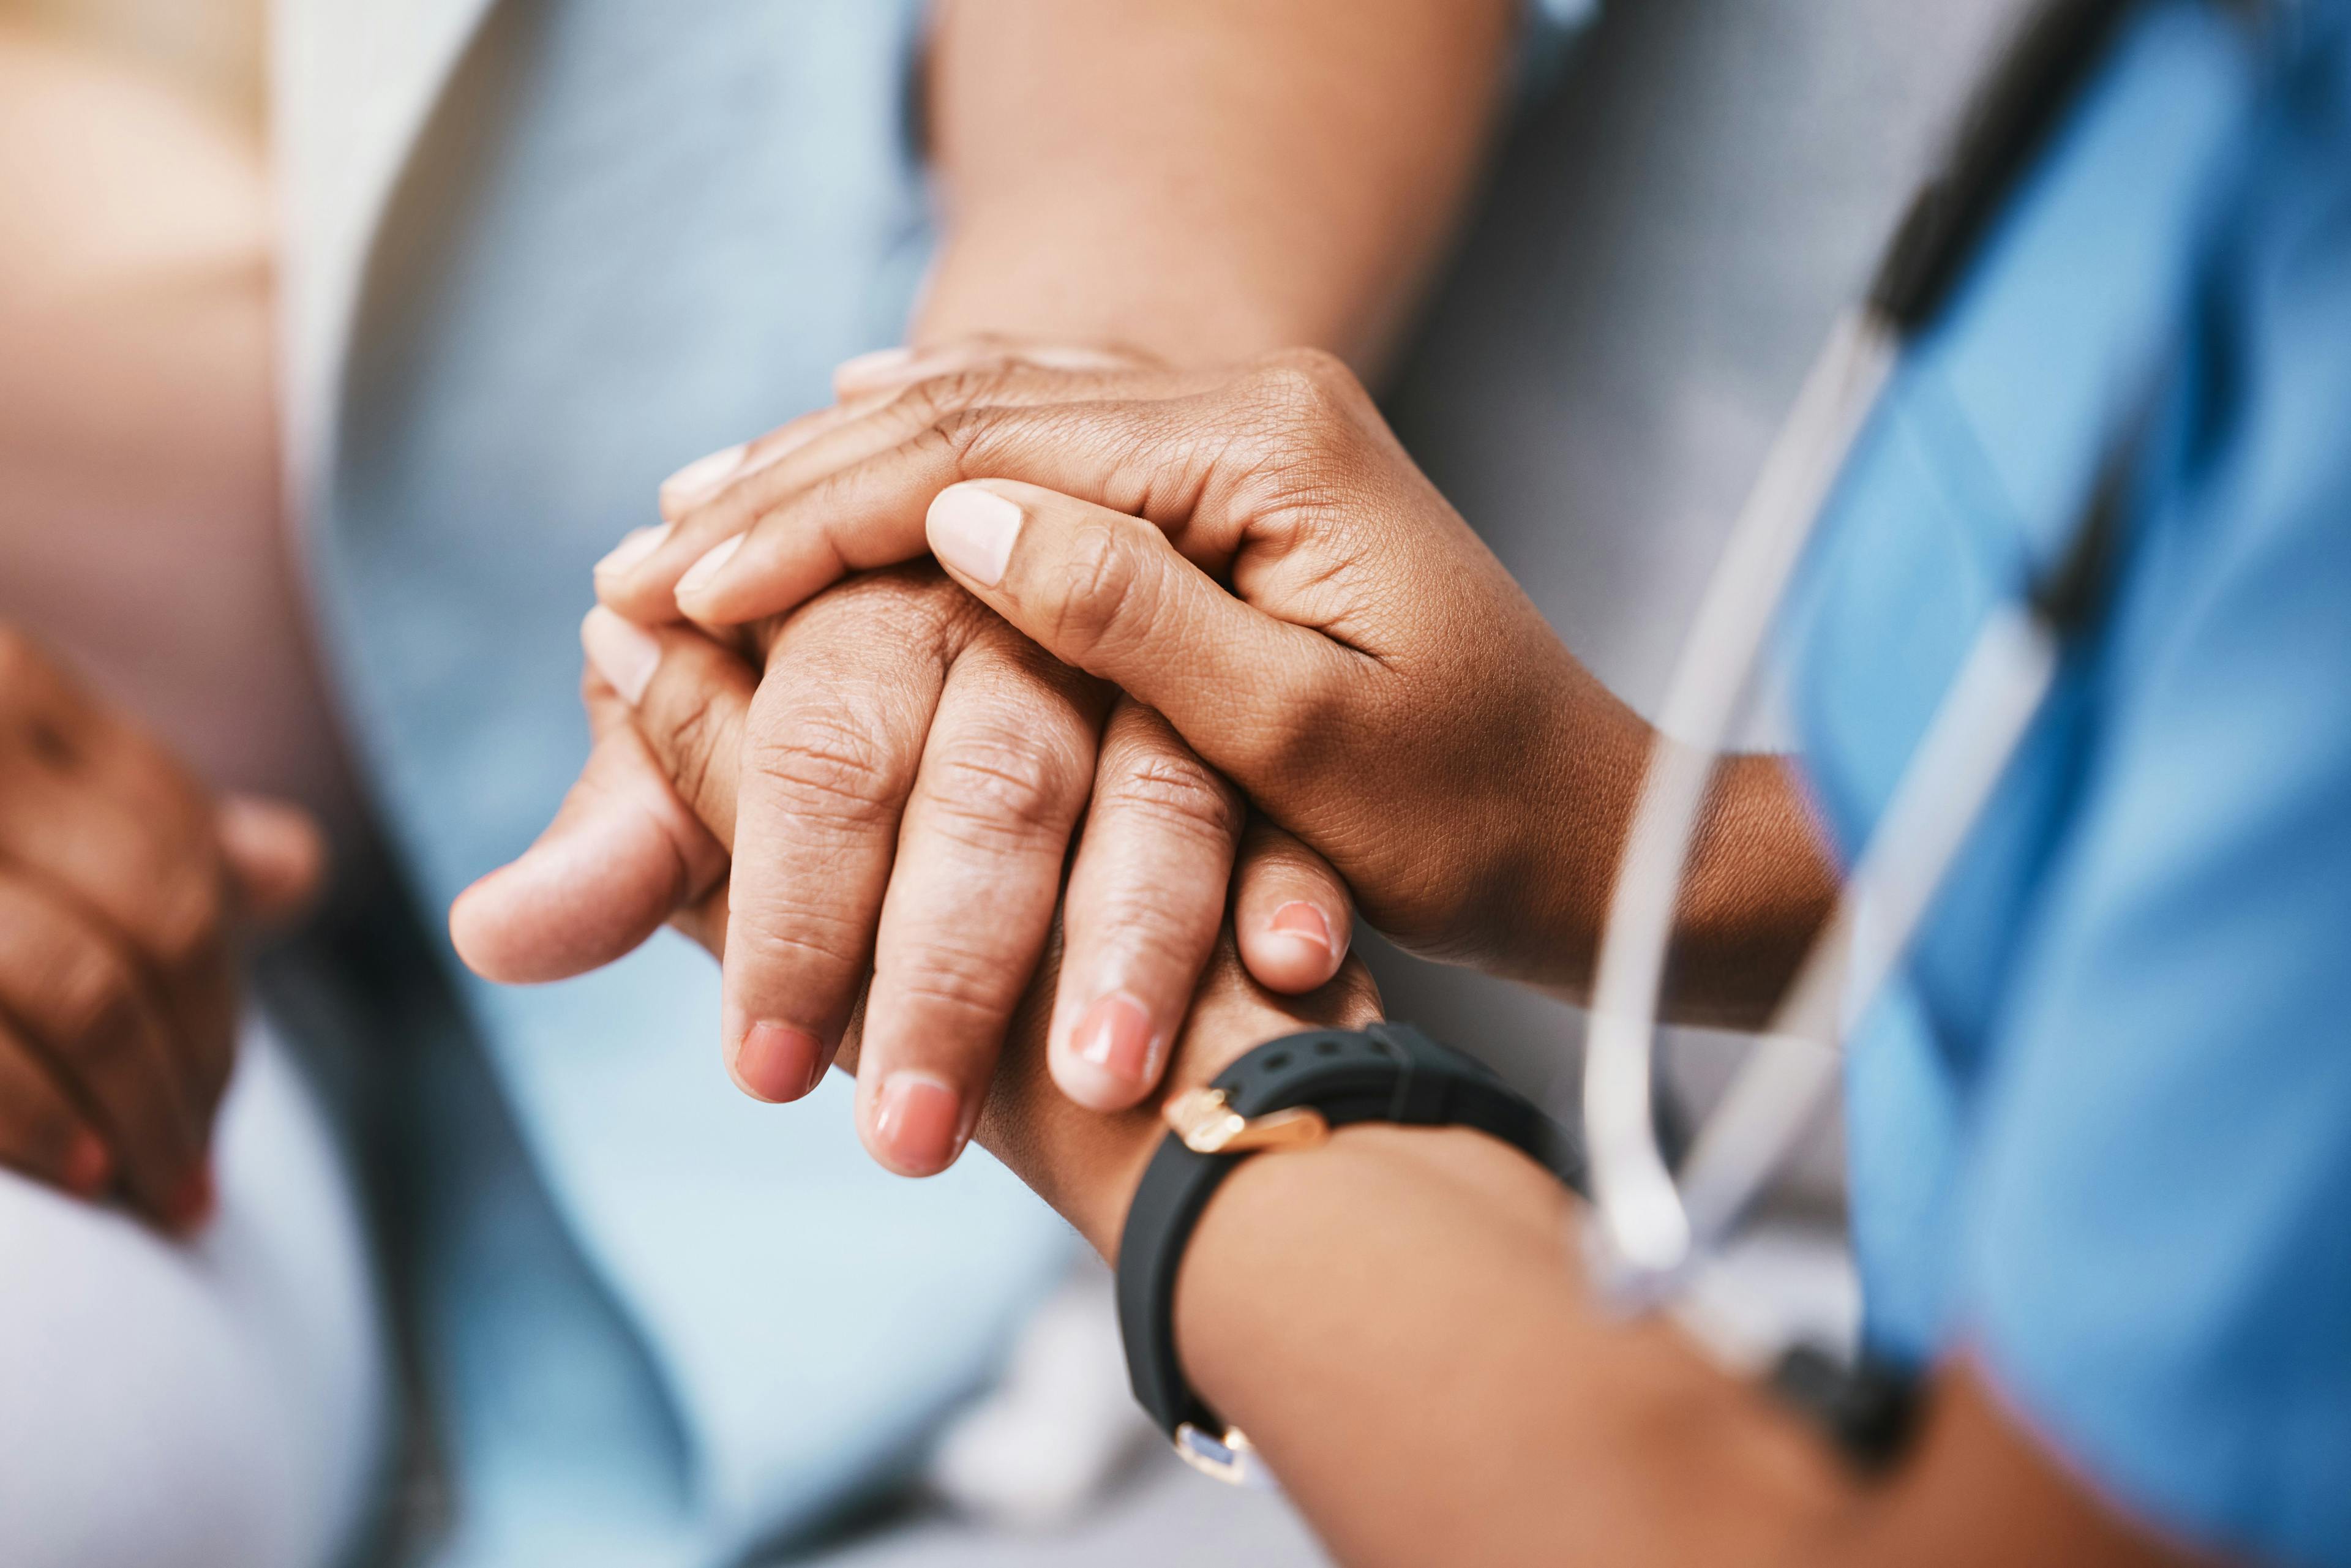 Empathy, trust and nurse holding hands with patient for help, consulting support and healthcare advice. Kindness, counseling and medical therapy in nursing home for hope, consultation and psychology. Image Credit" Adobe Stock Images/C Davids/peopleimages.com